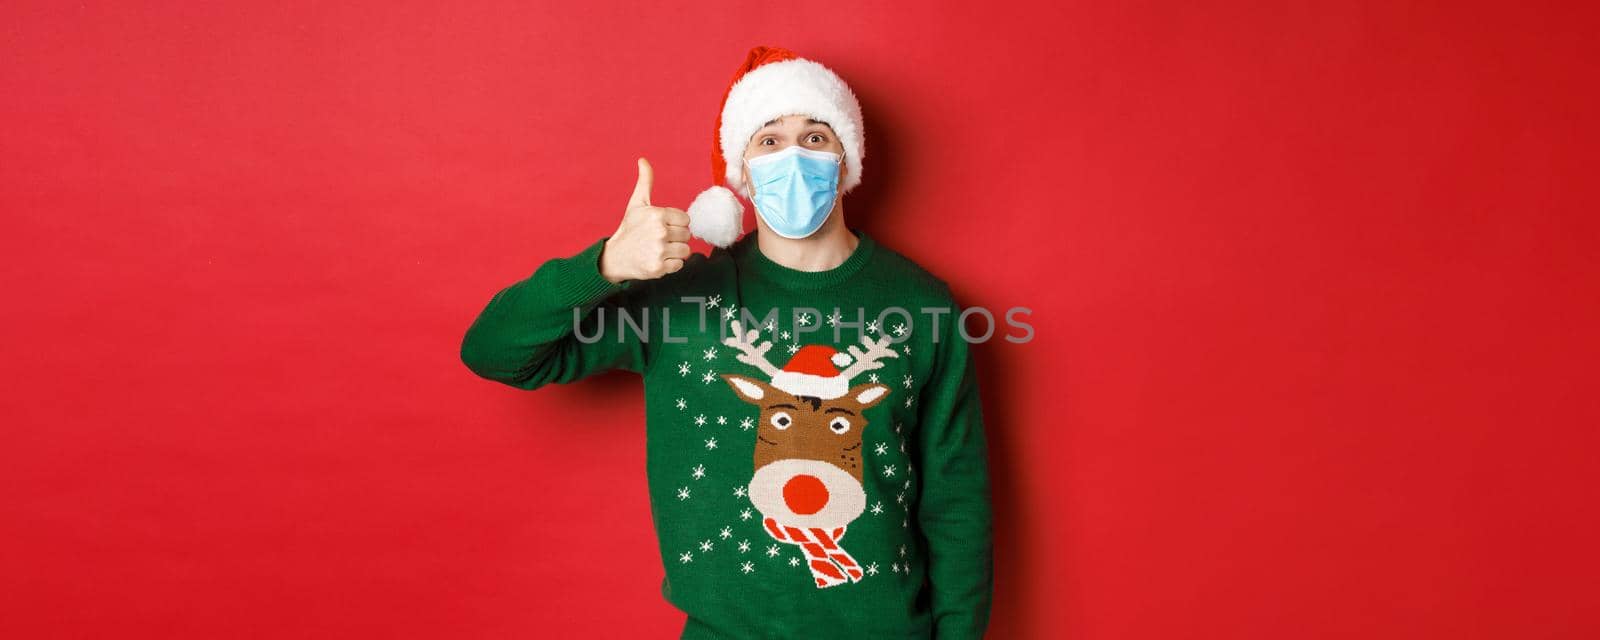 Concept of new year, covid-19 and social distancing. Amazed young guy celebrating christmas, wearing medical mask and santa hat, showing thumb-up in approval, red background.